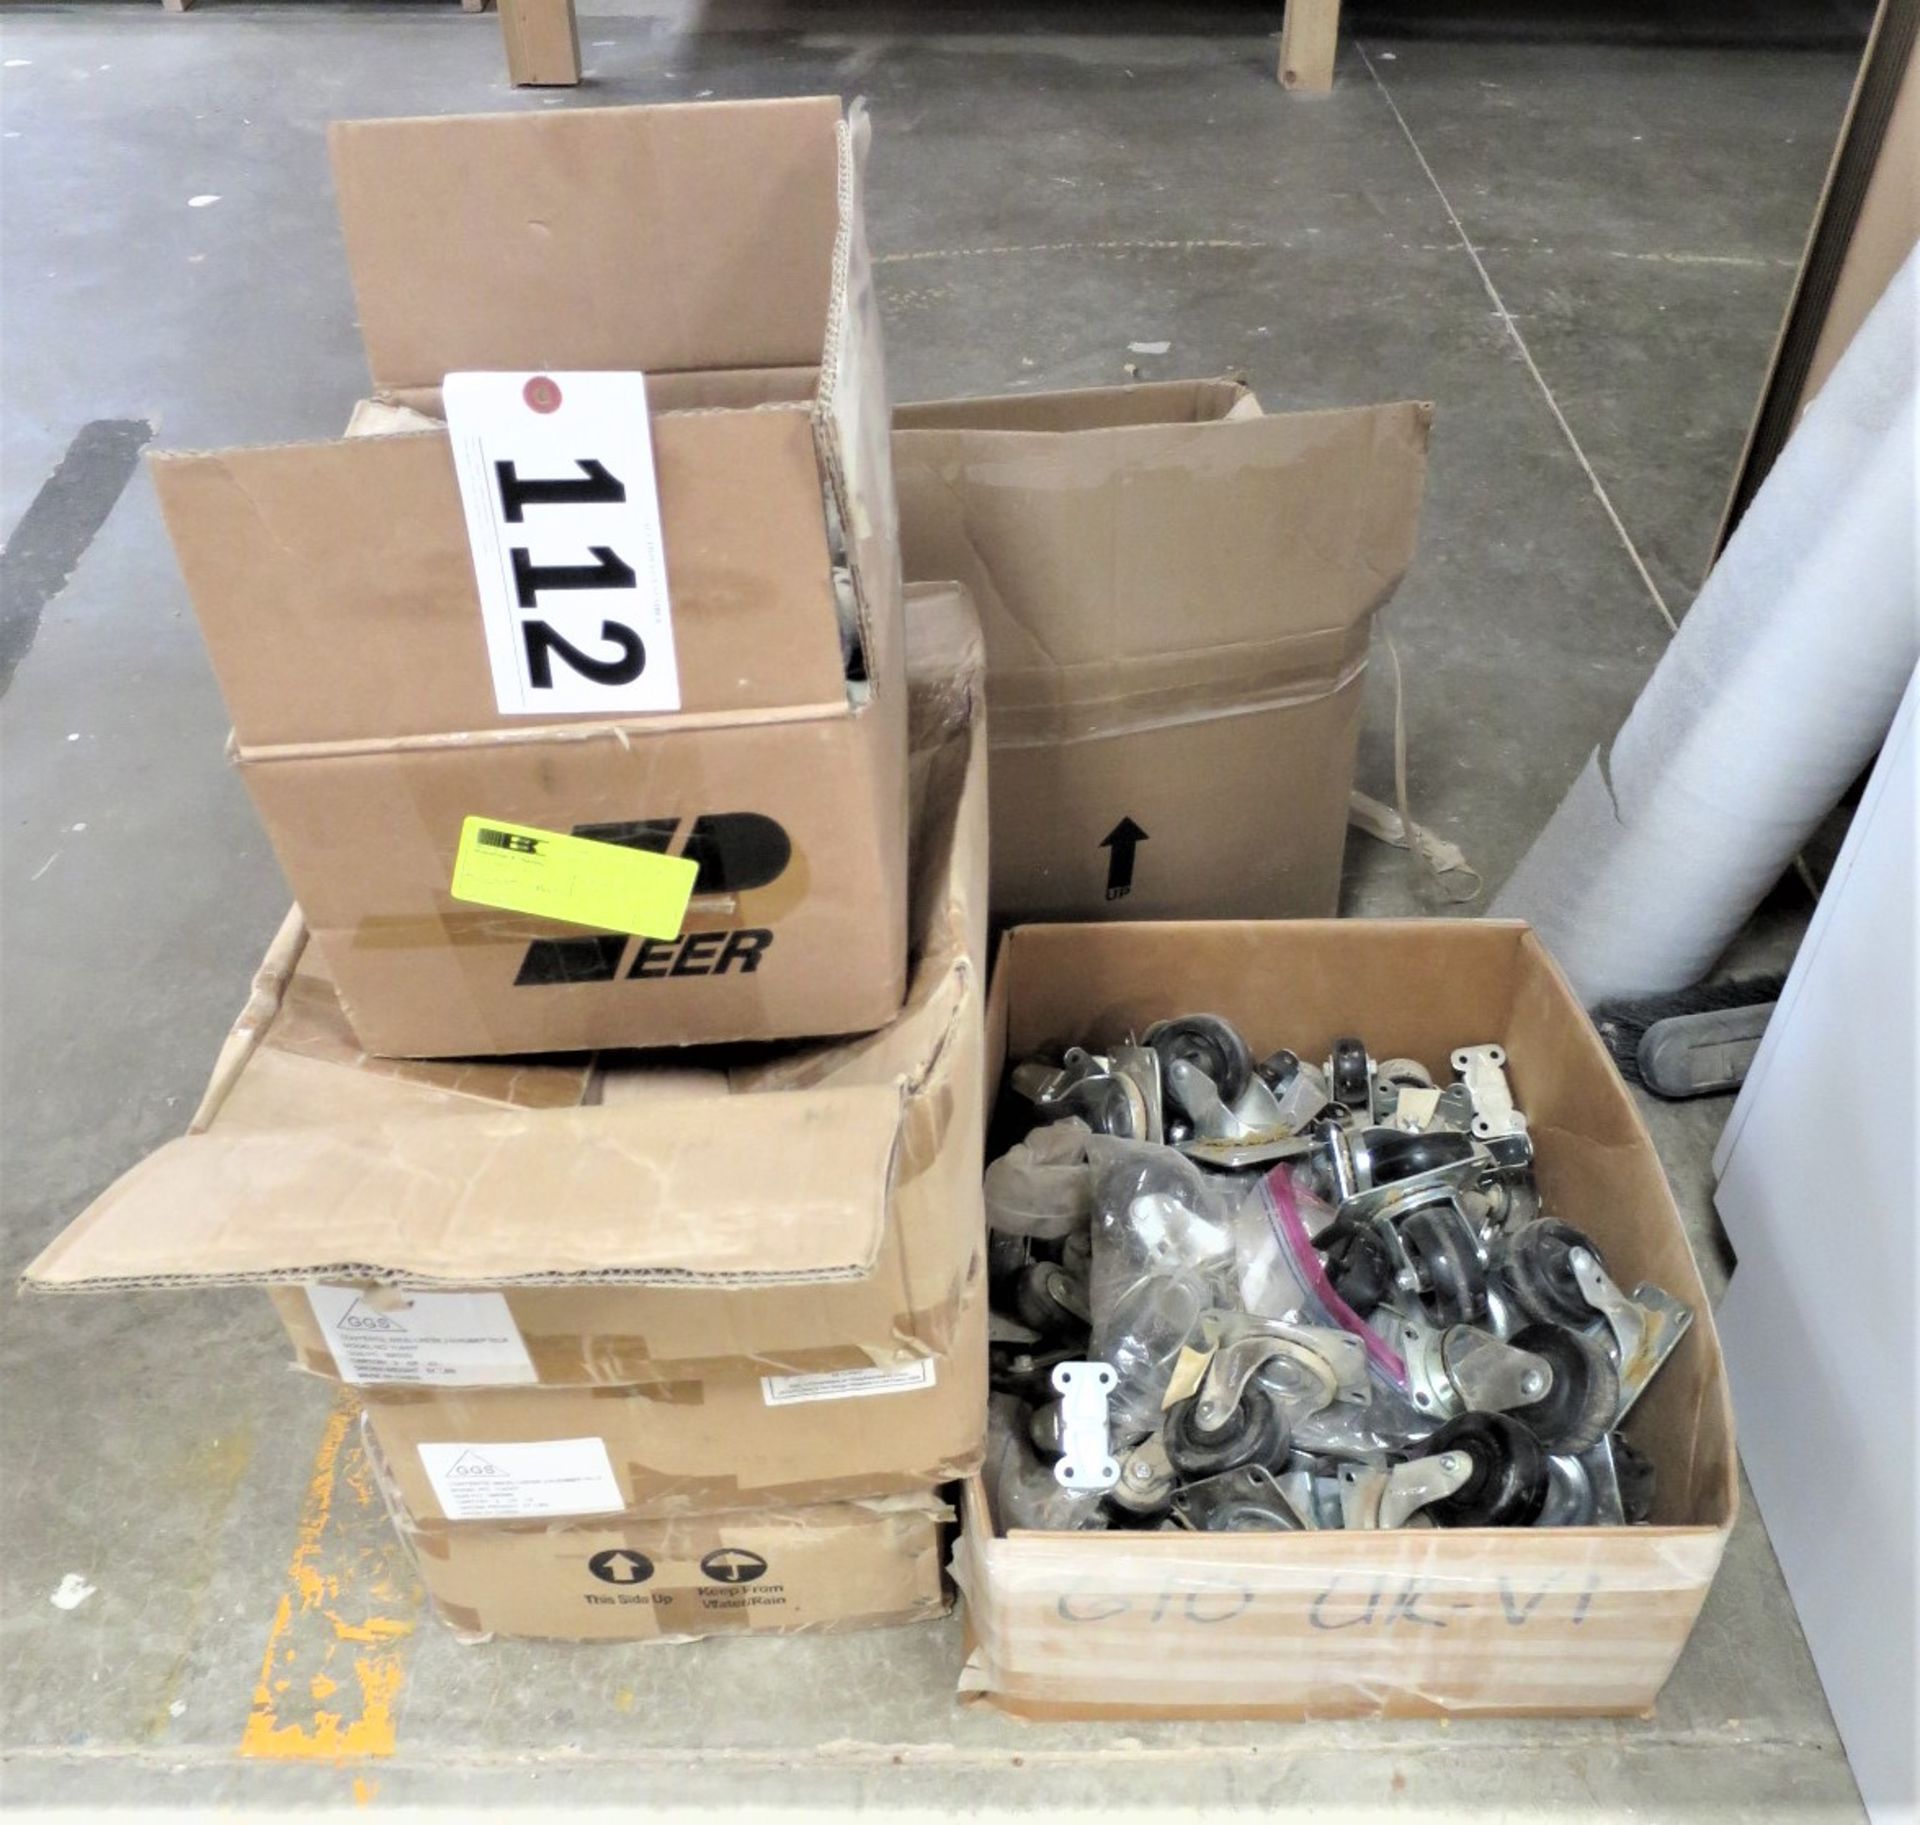 (6) Boxes of Heavy Duty Casters various sizes